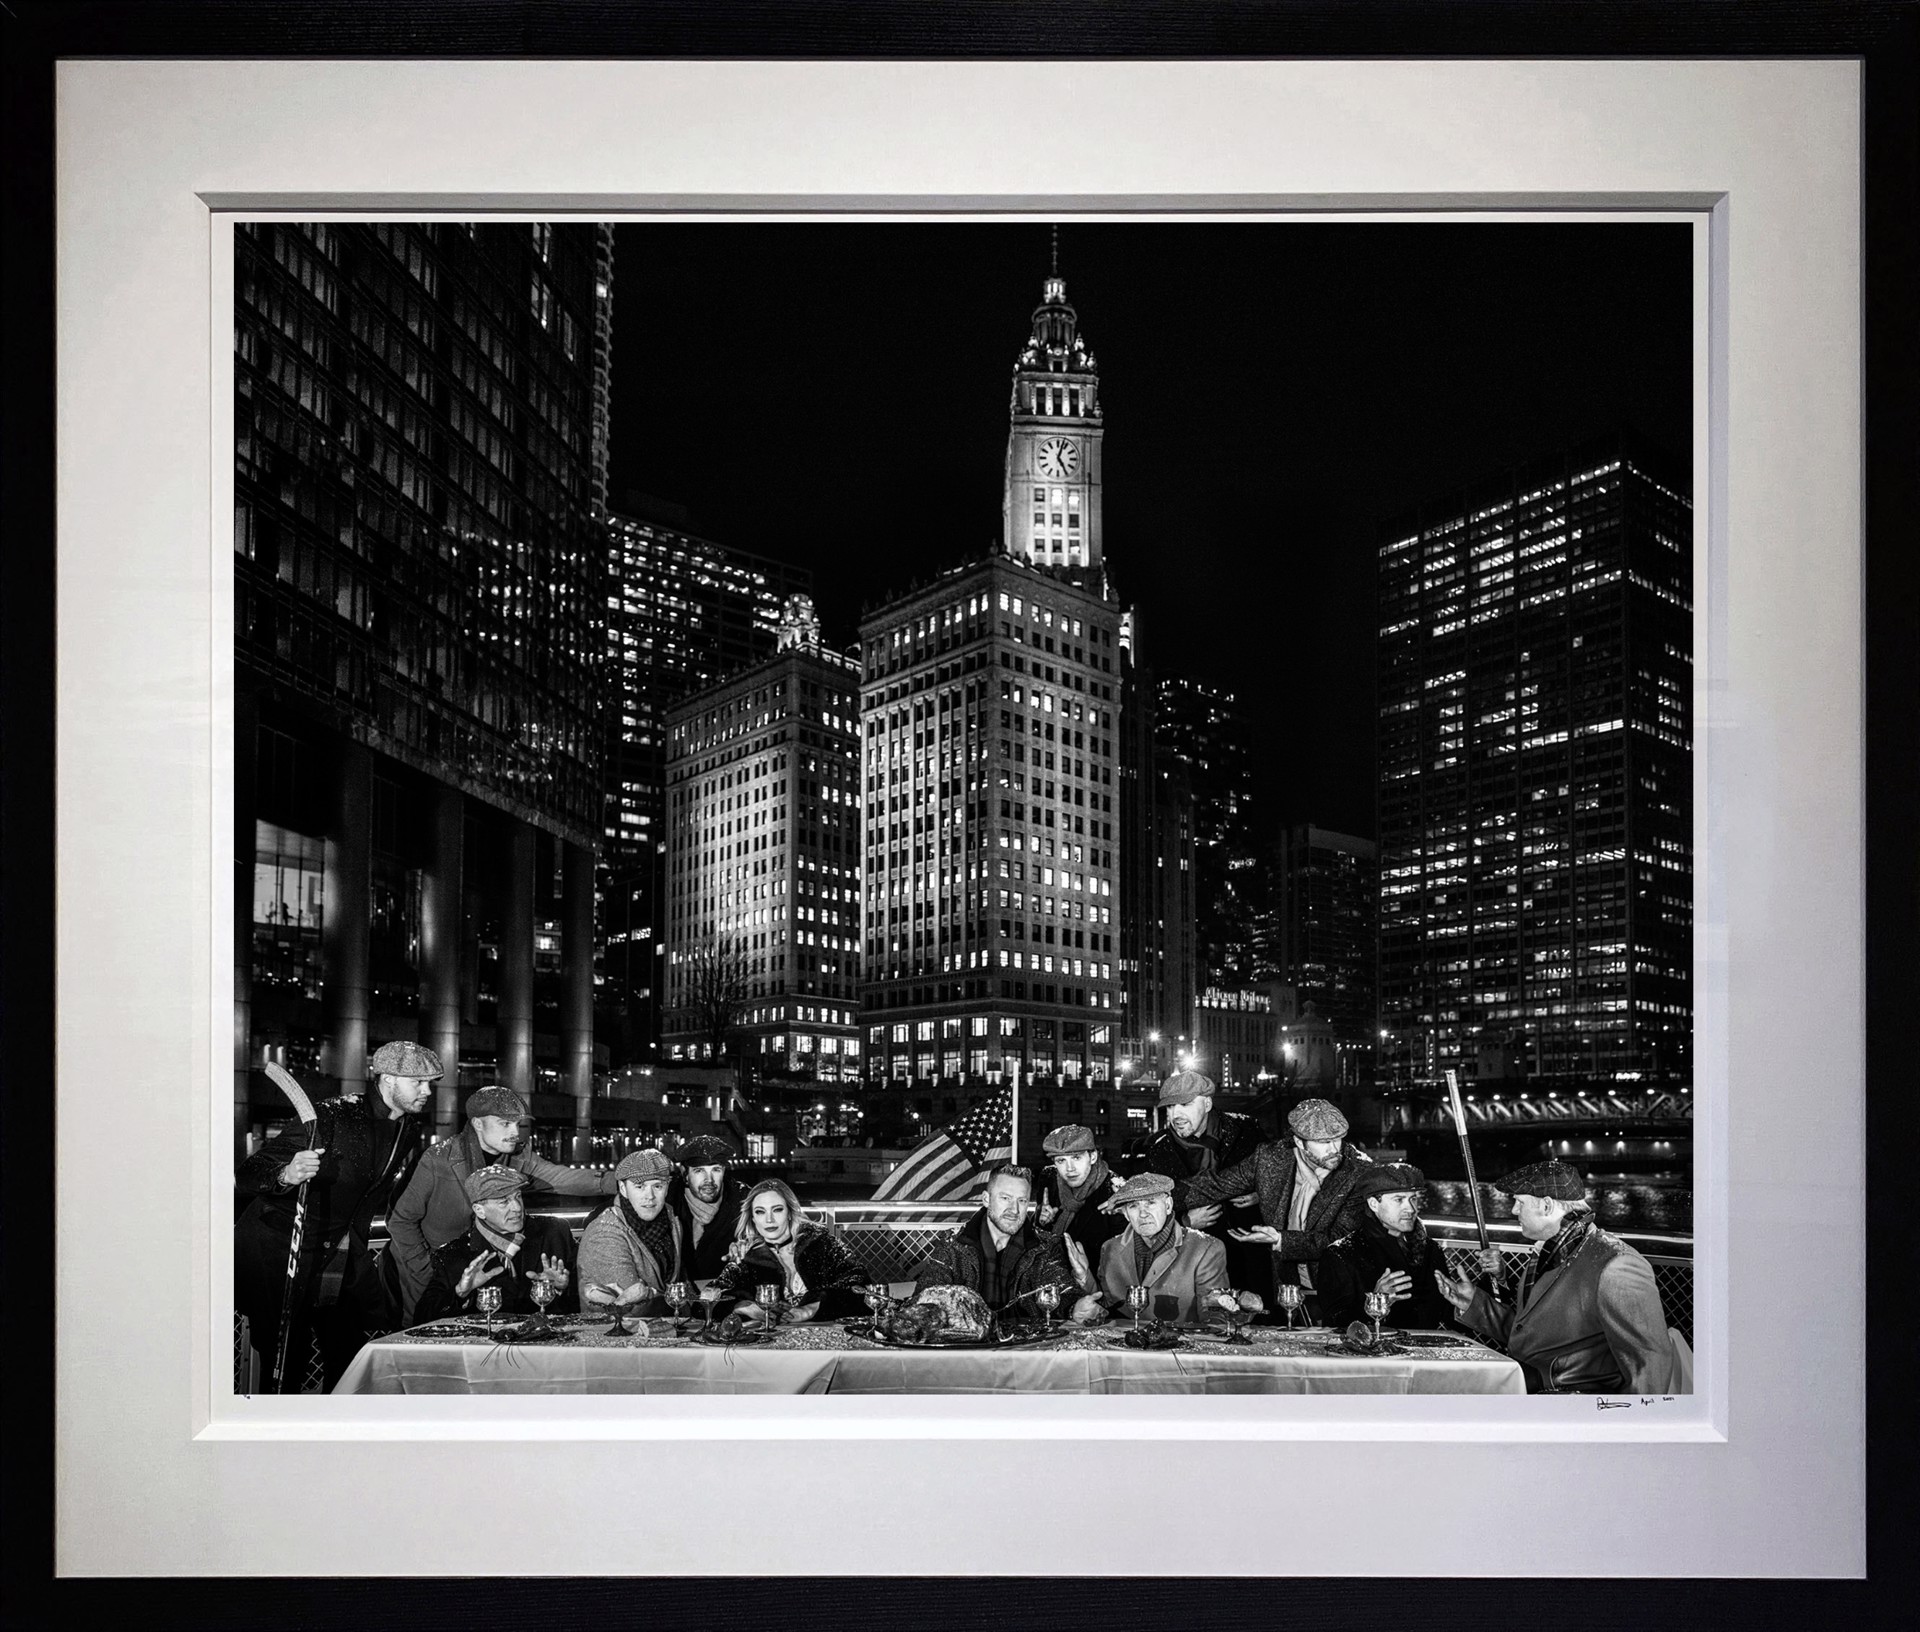 The Last Supper in Chicago by David Yarrow